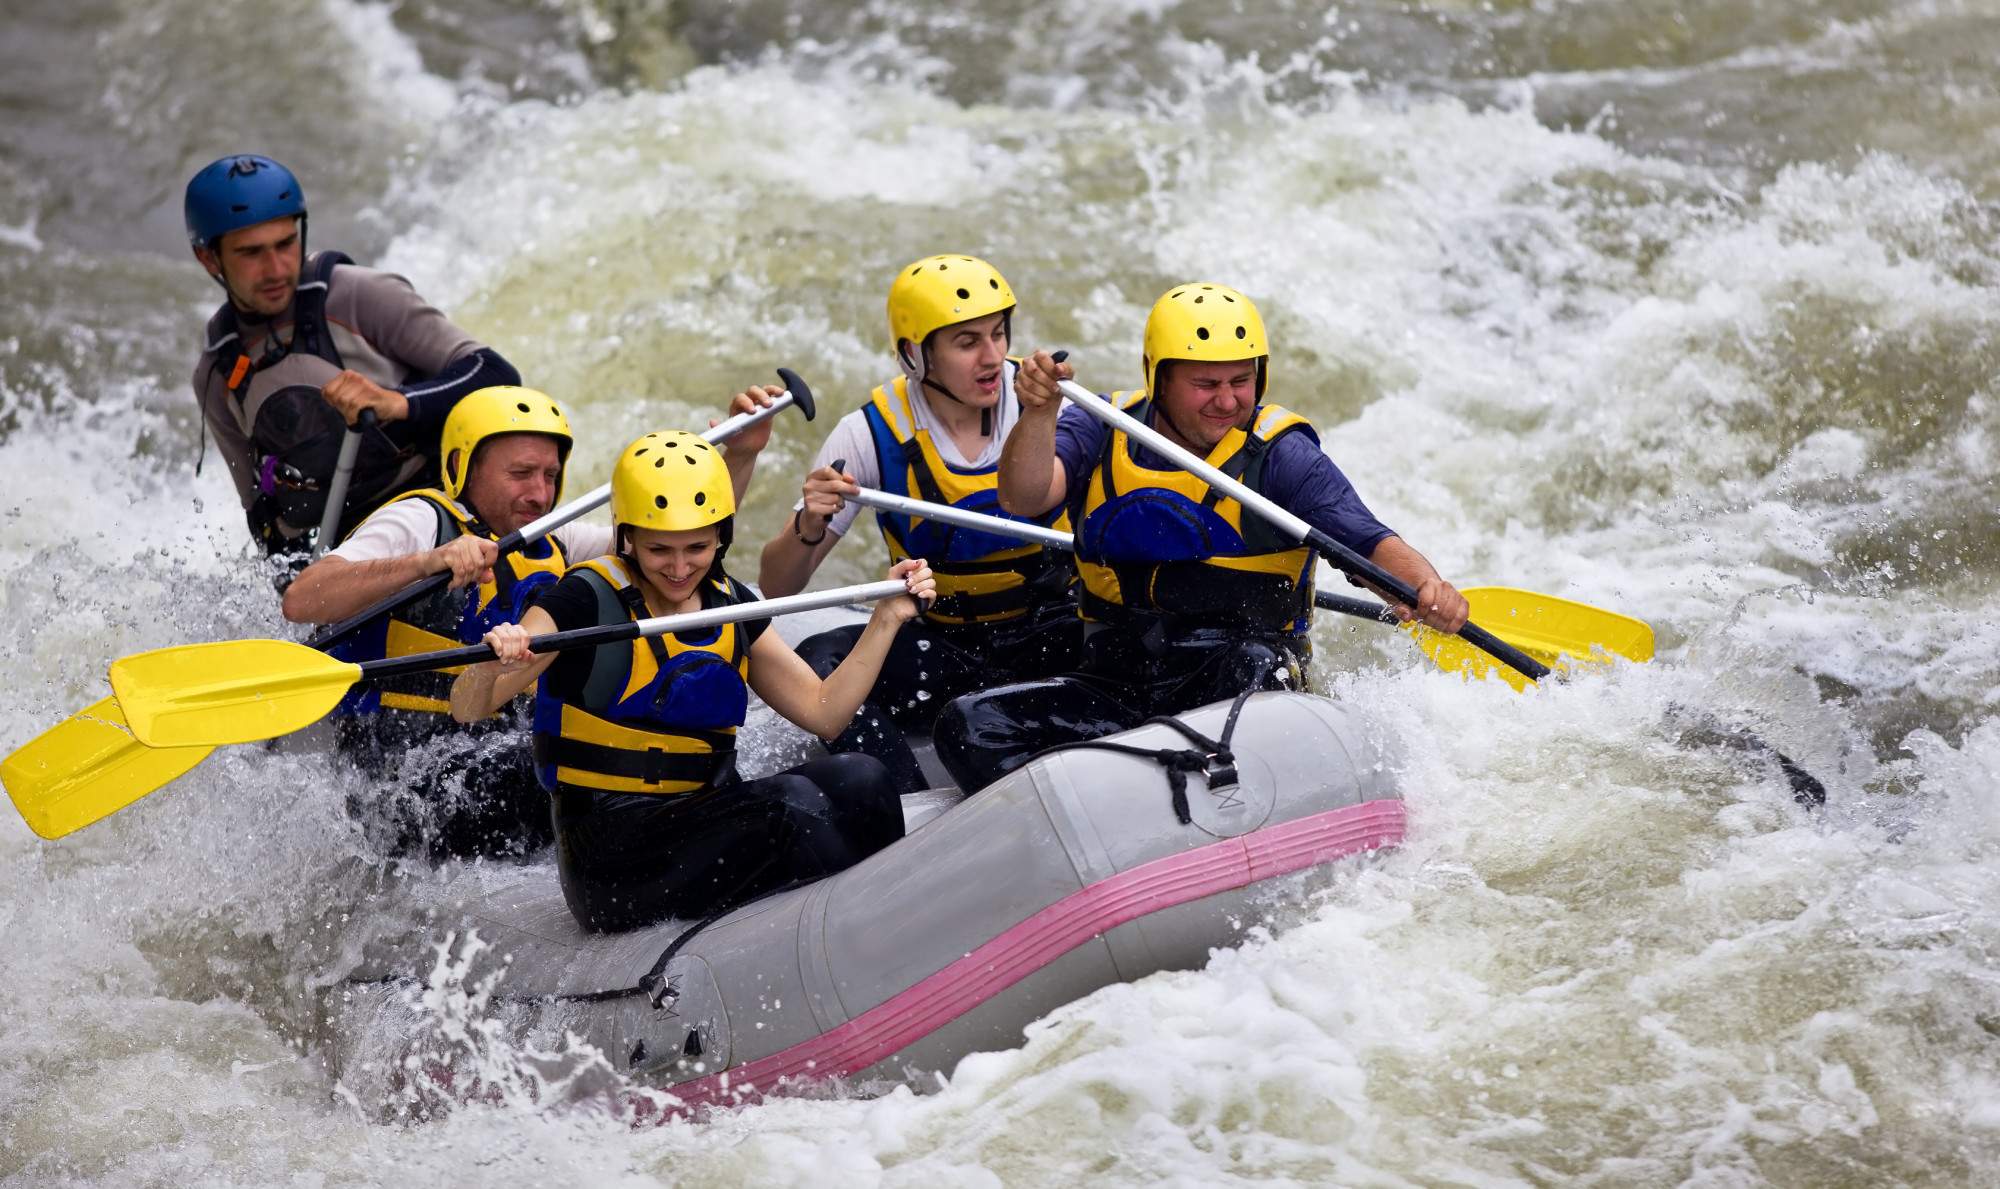 Travel Tips for Planning Your American River Rafting Adventure